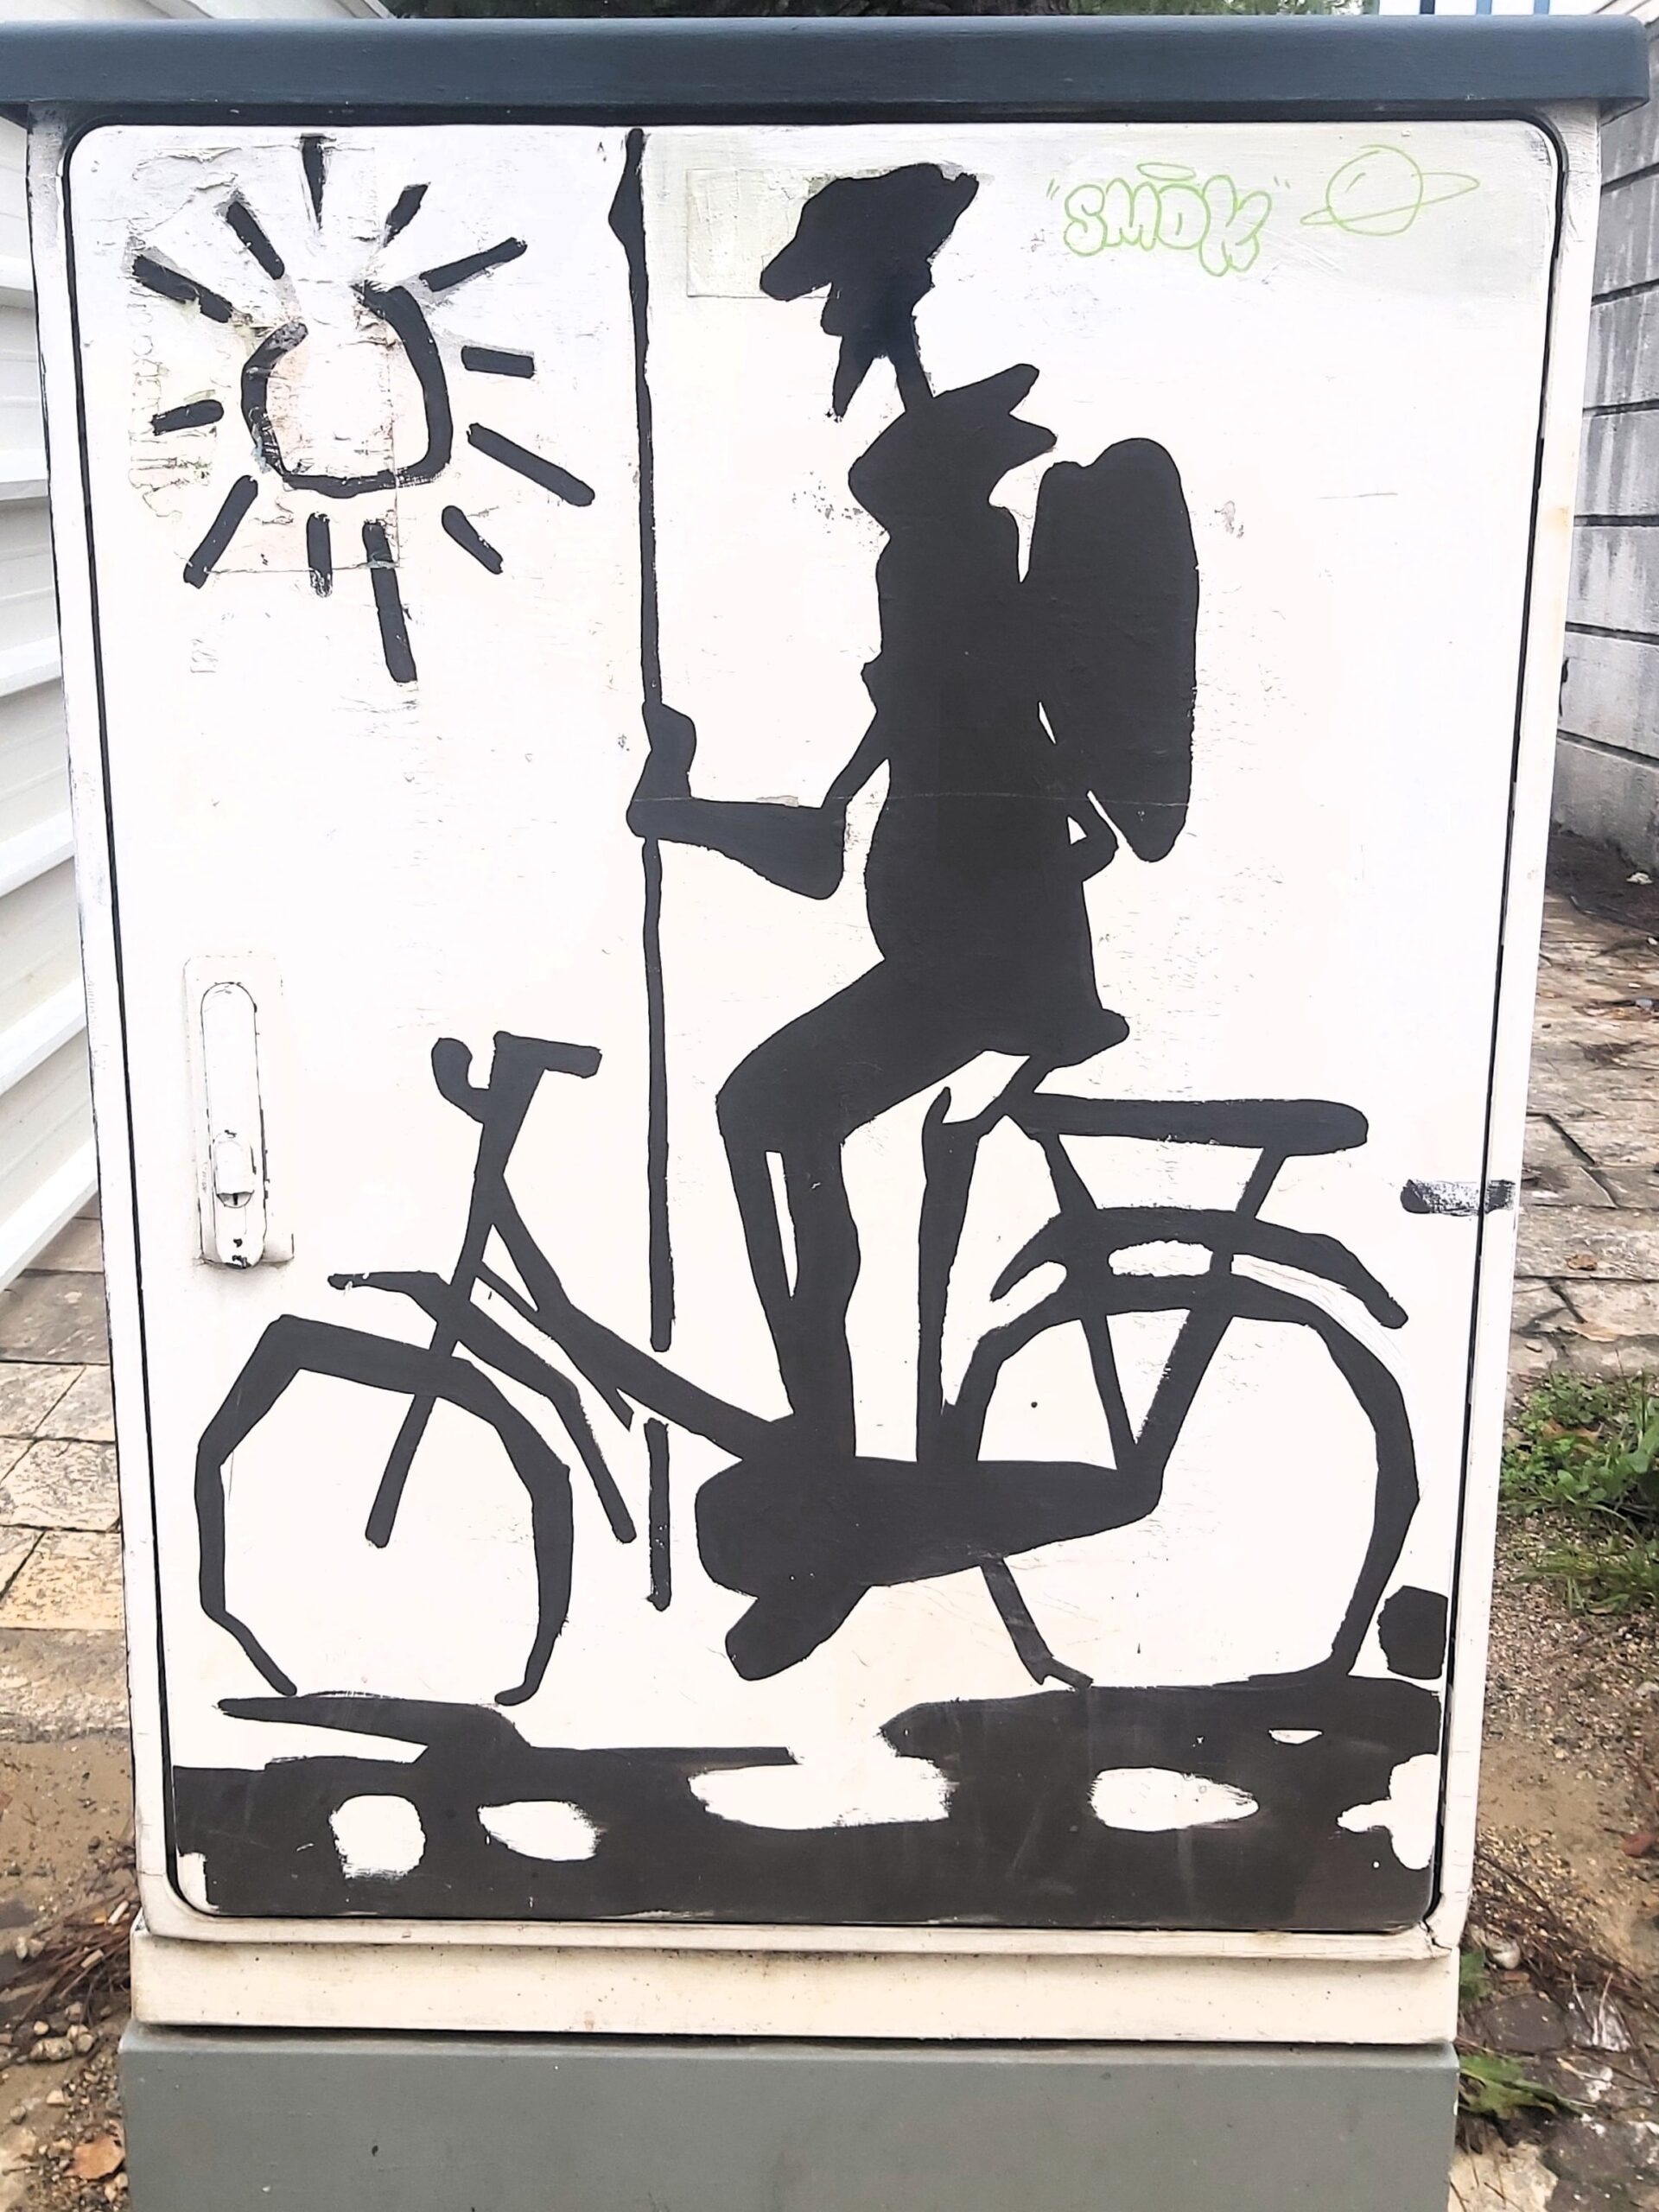 A black and white image of a cyclist on a utilities box in Tirana, Albania